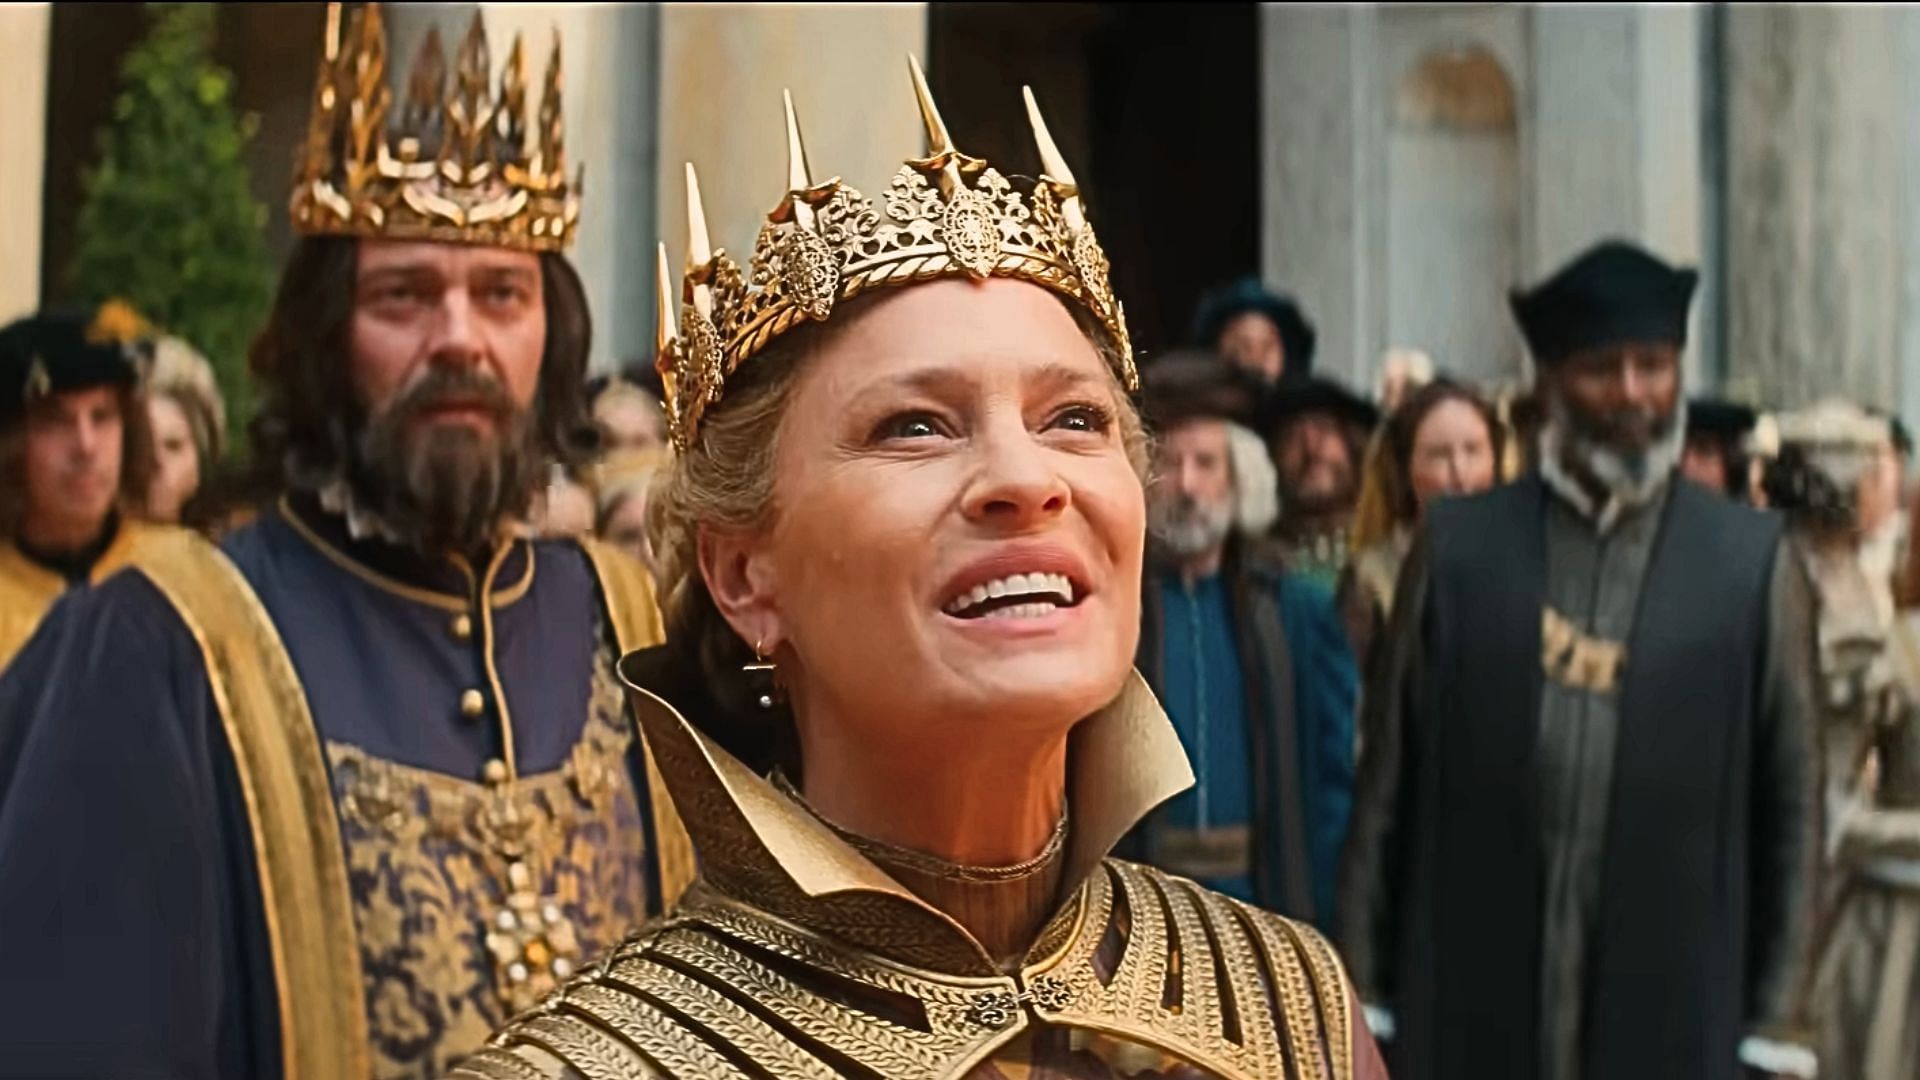 Actress Robin Wright plays the role of Queen Isabelle in the movie Damsel (Image via Netflix, official trailer, 2:14)